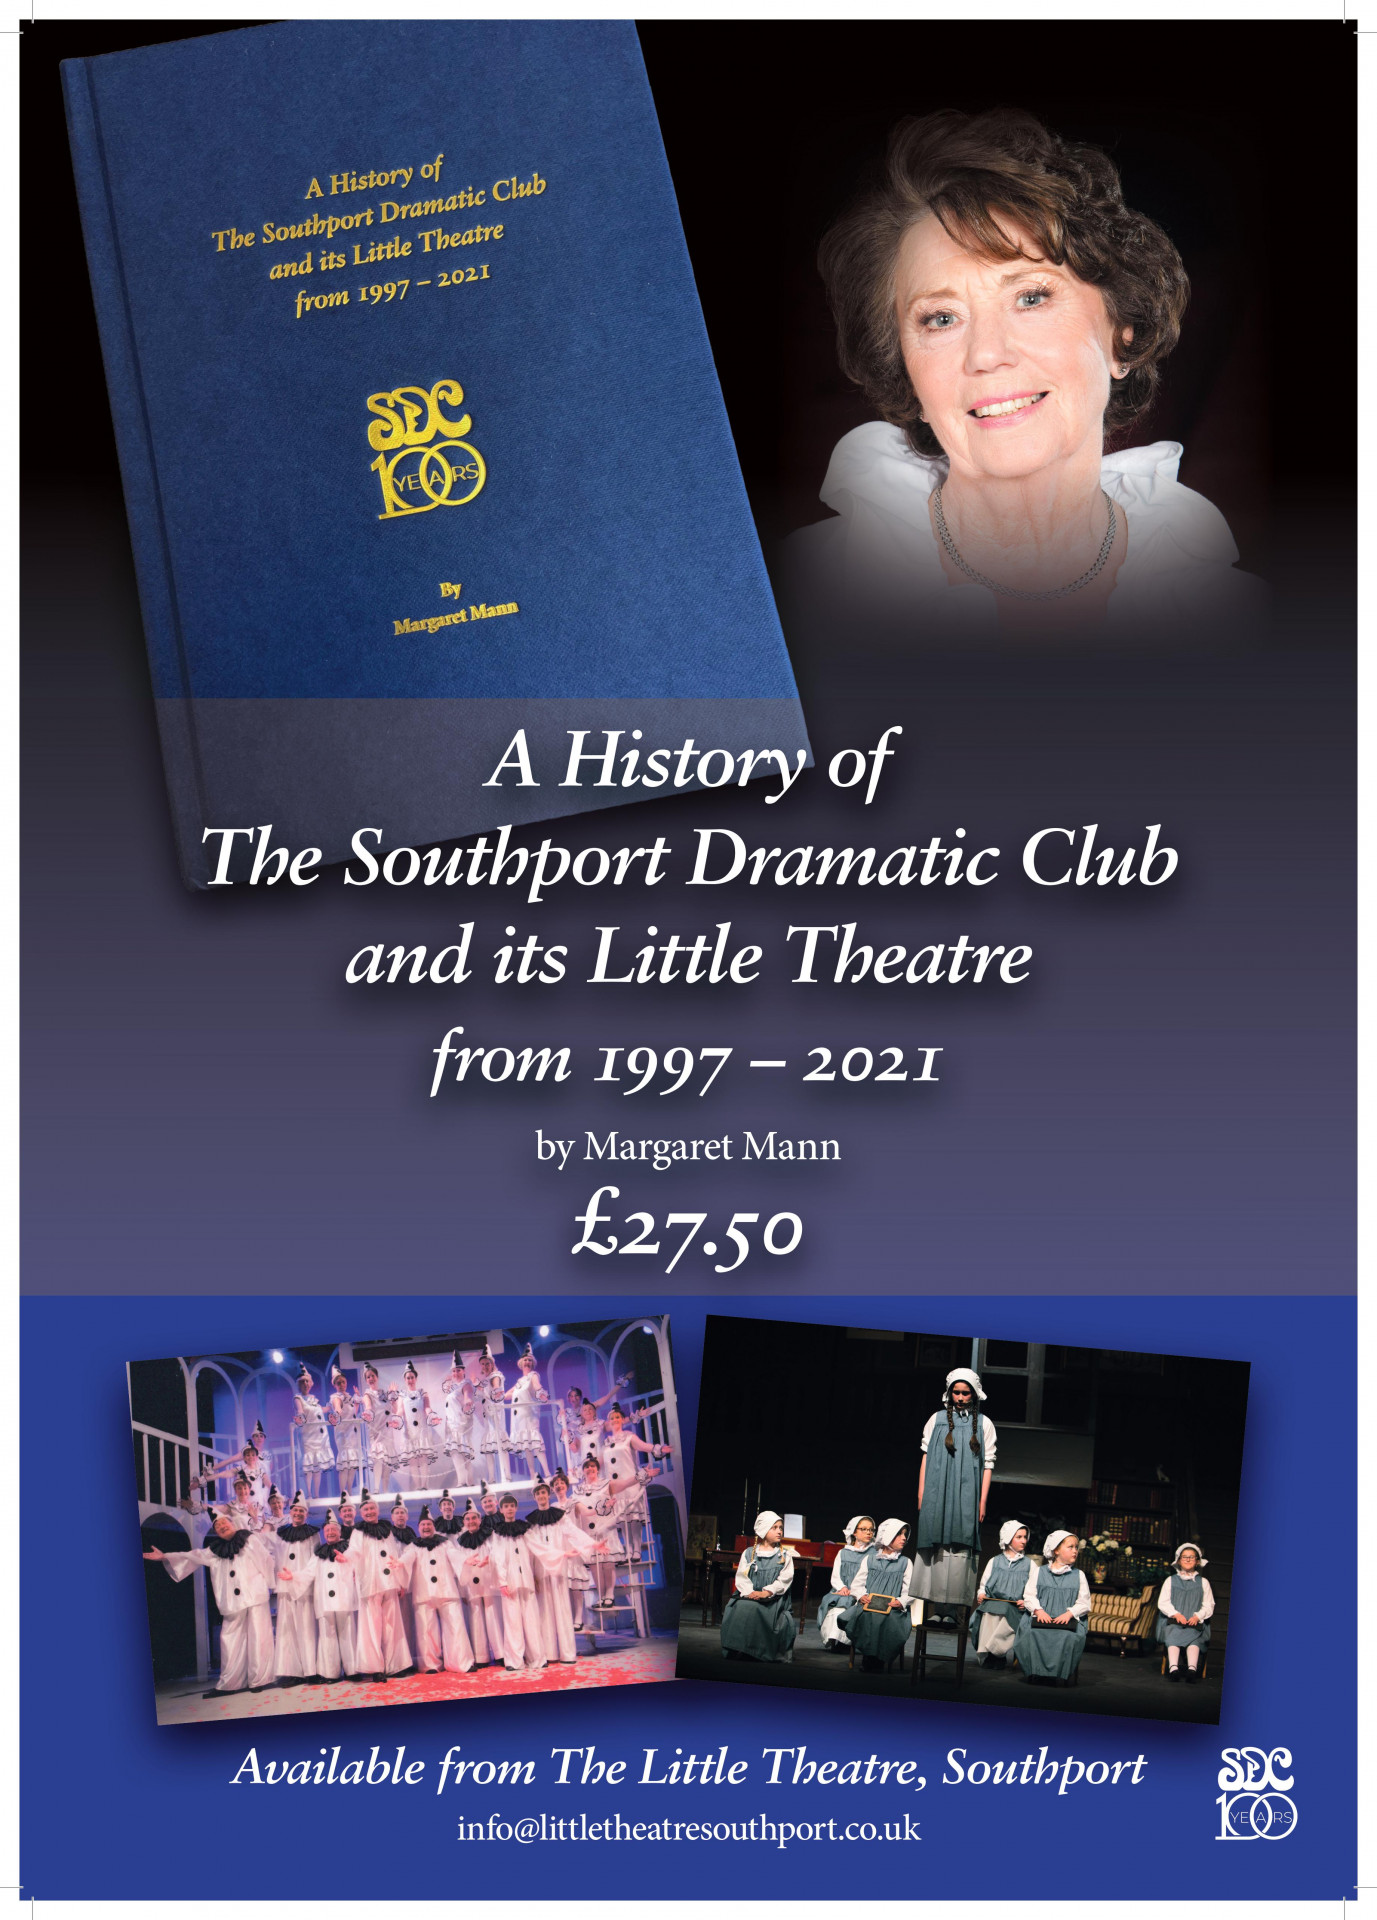 A History of the Southport Dramatic Club and its Little Theatre 1997-2021 by Margaret Mann